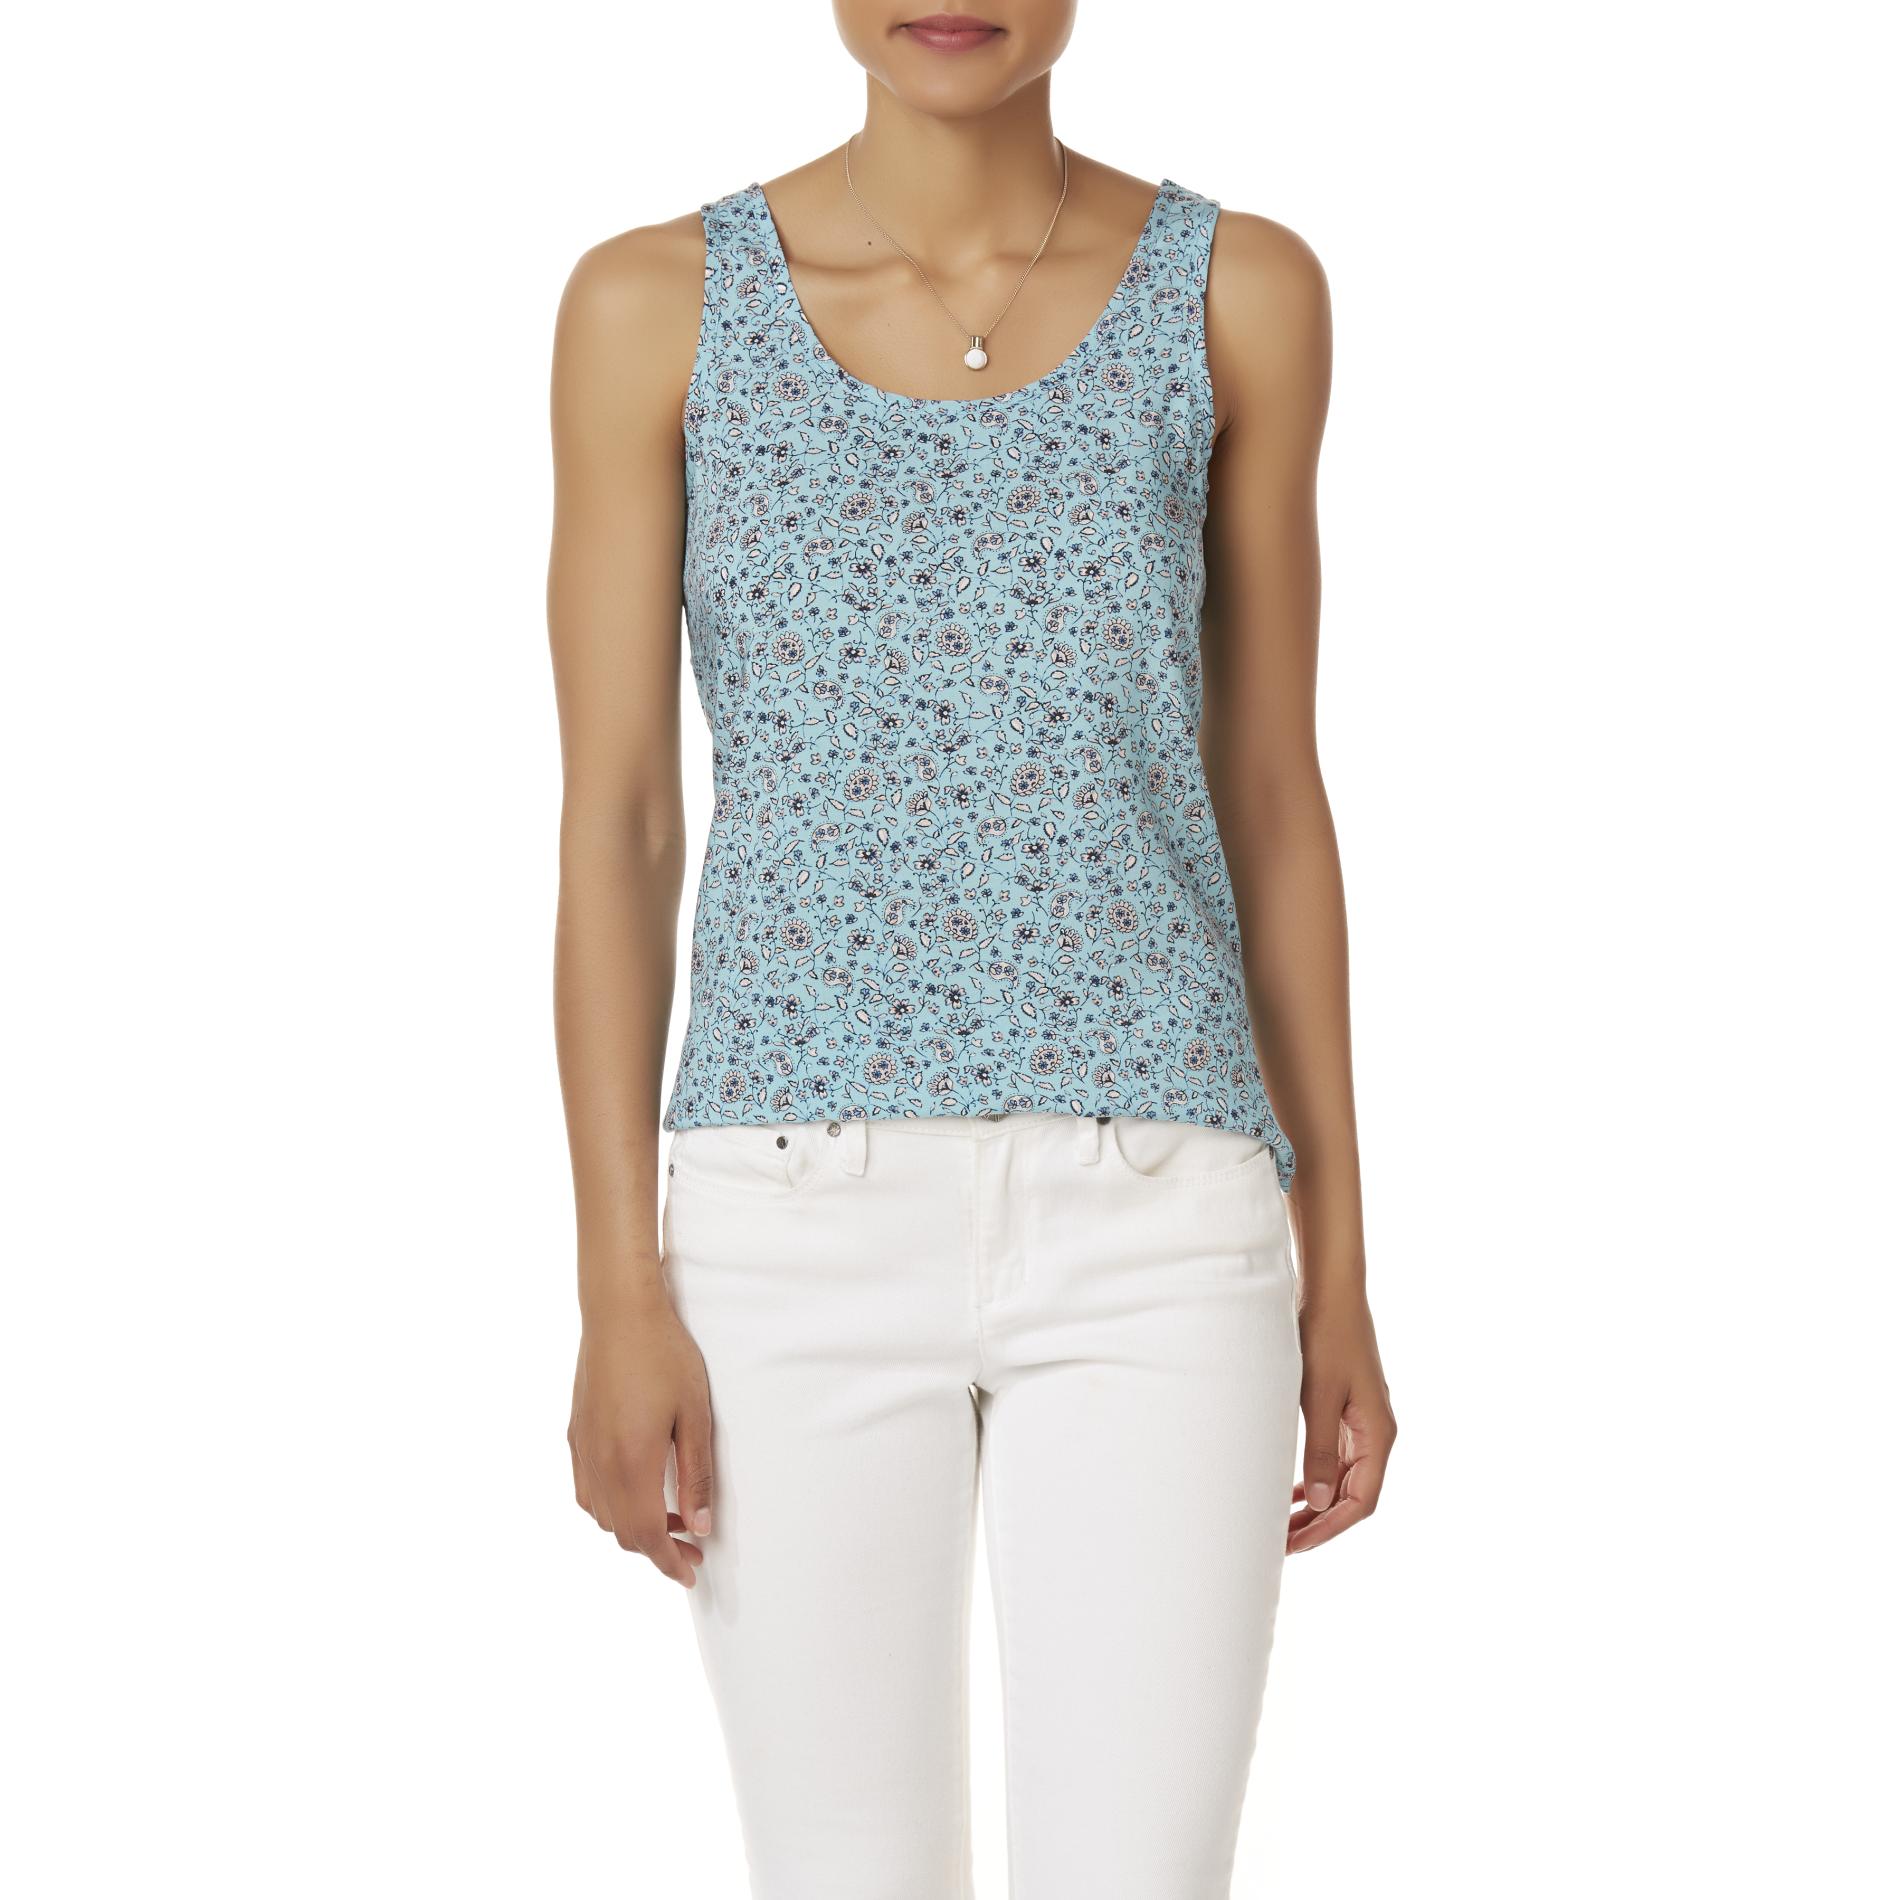 Simply Styled Women's Tank Top - Floral & Paisley